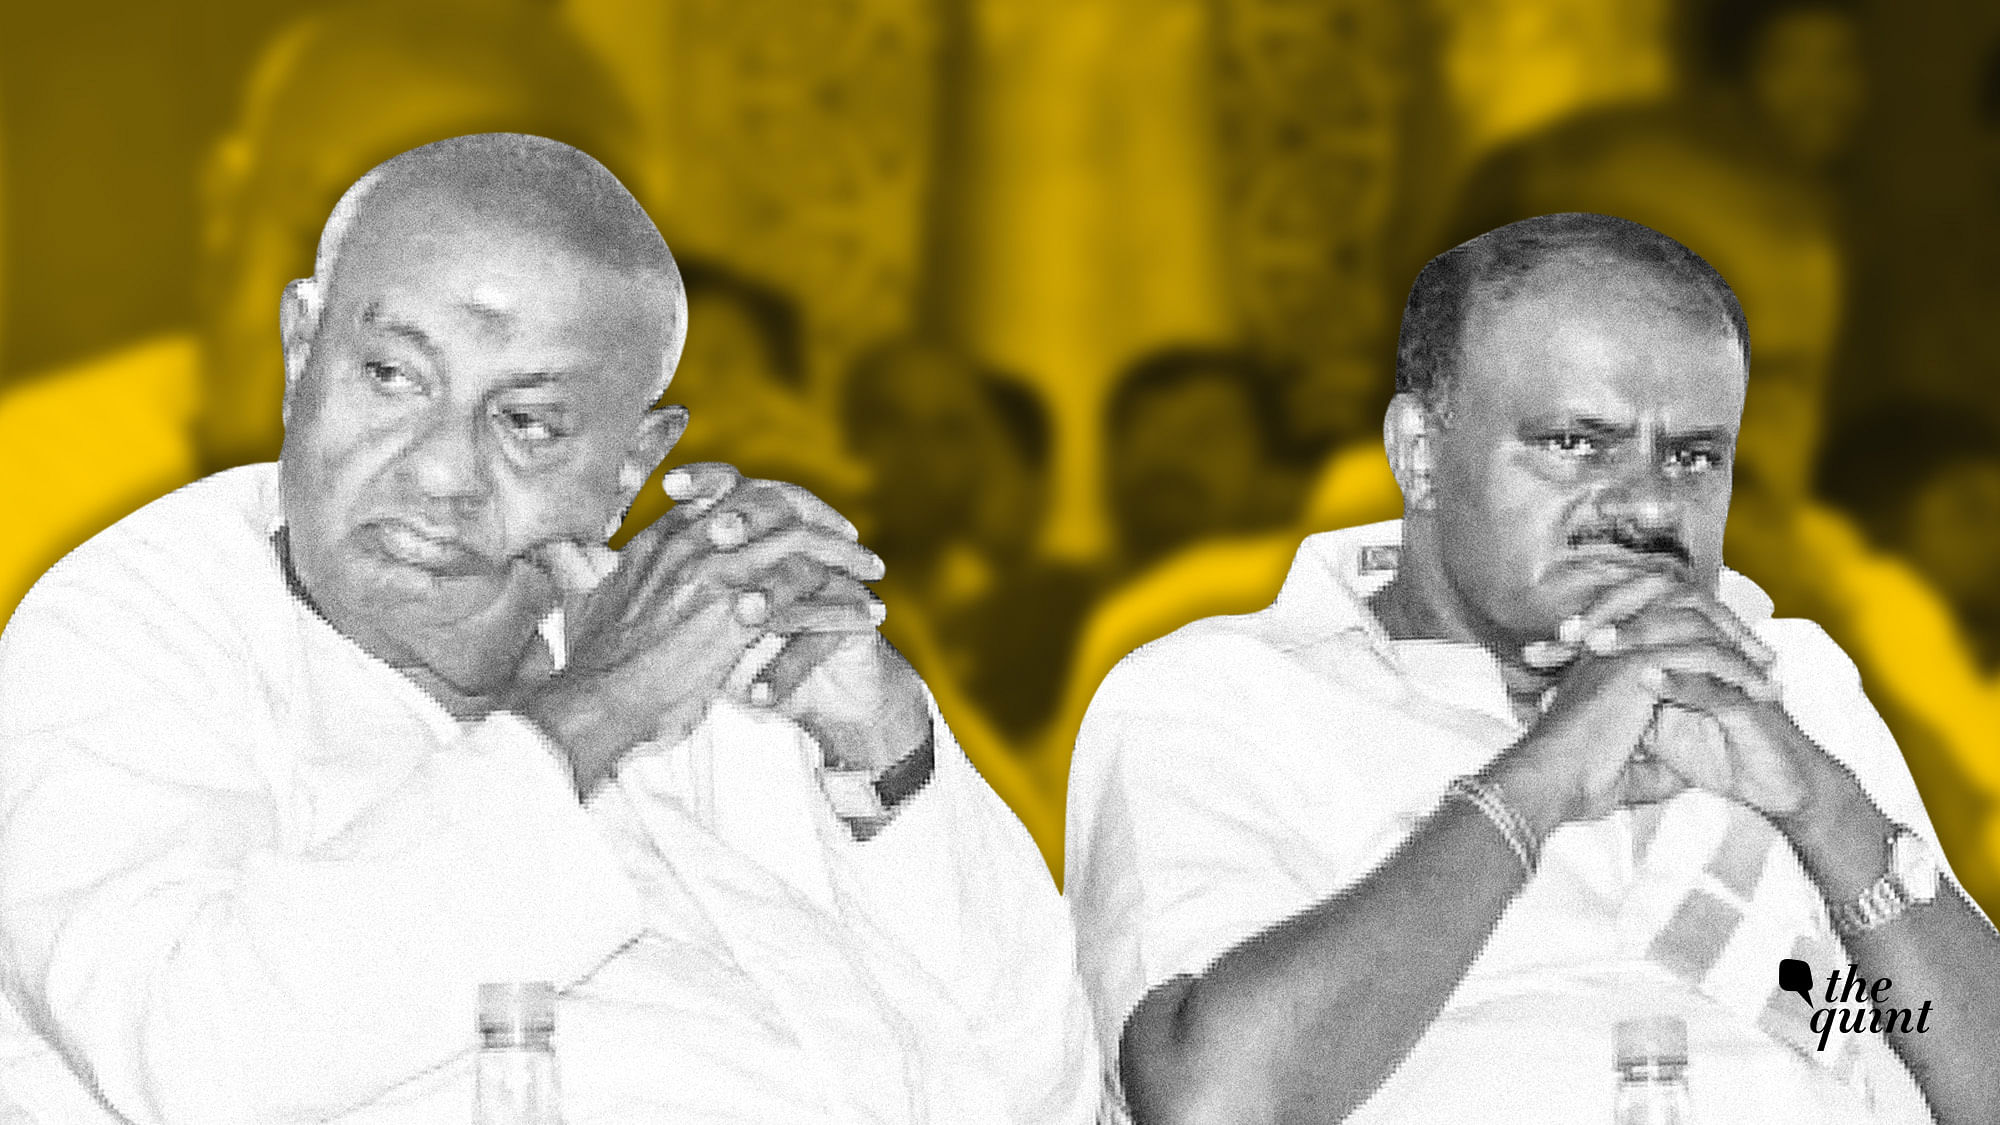 CM HD Kumaraswamy (right) with his father, HD Deve Gowda (left).&nbsp;